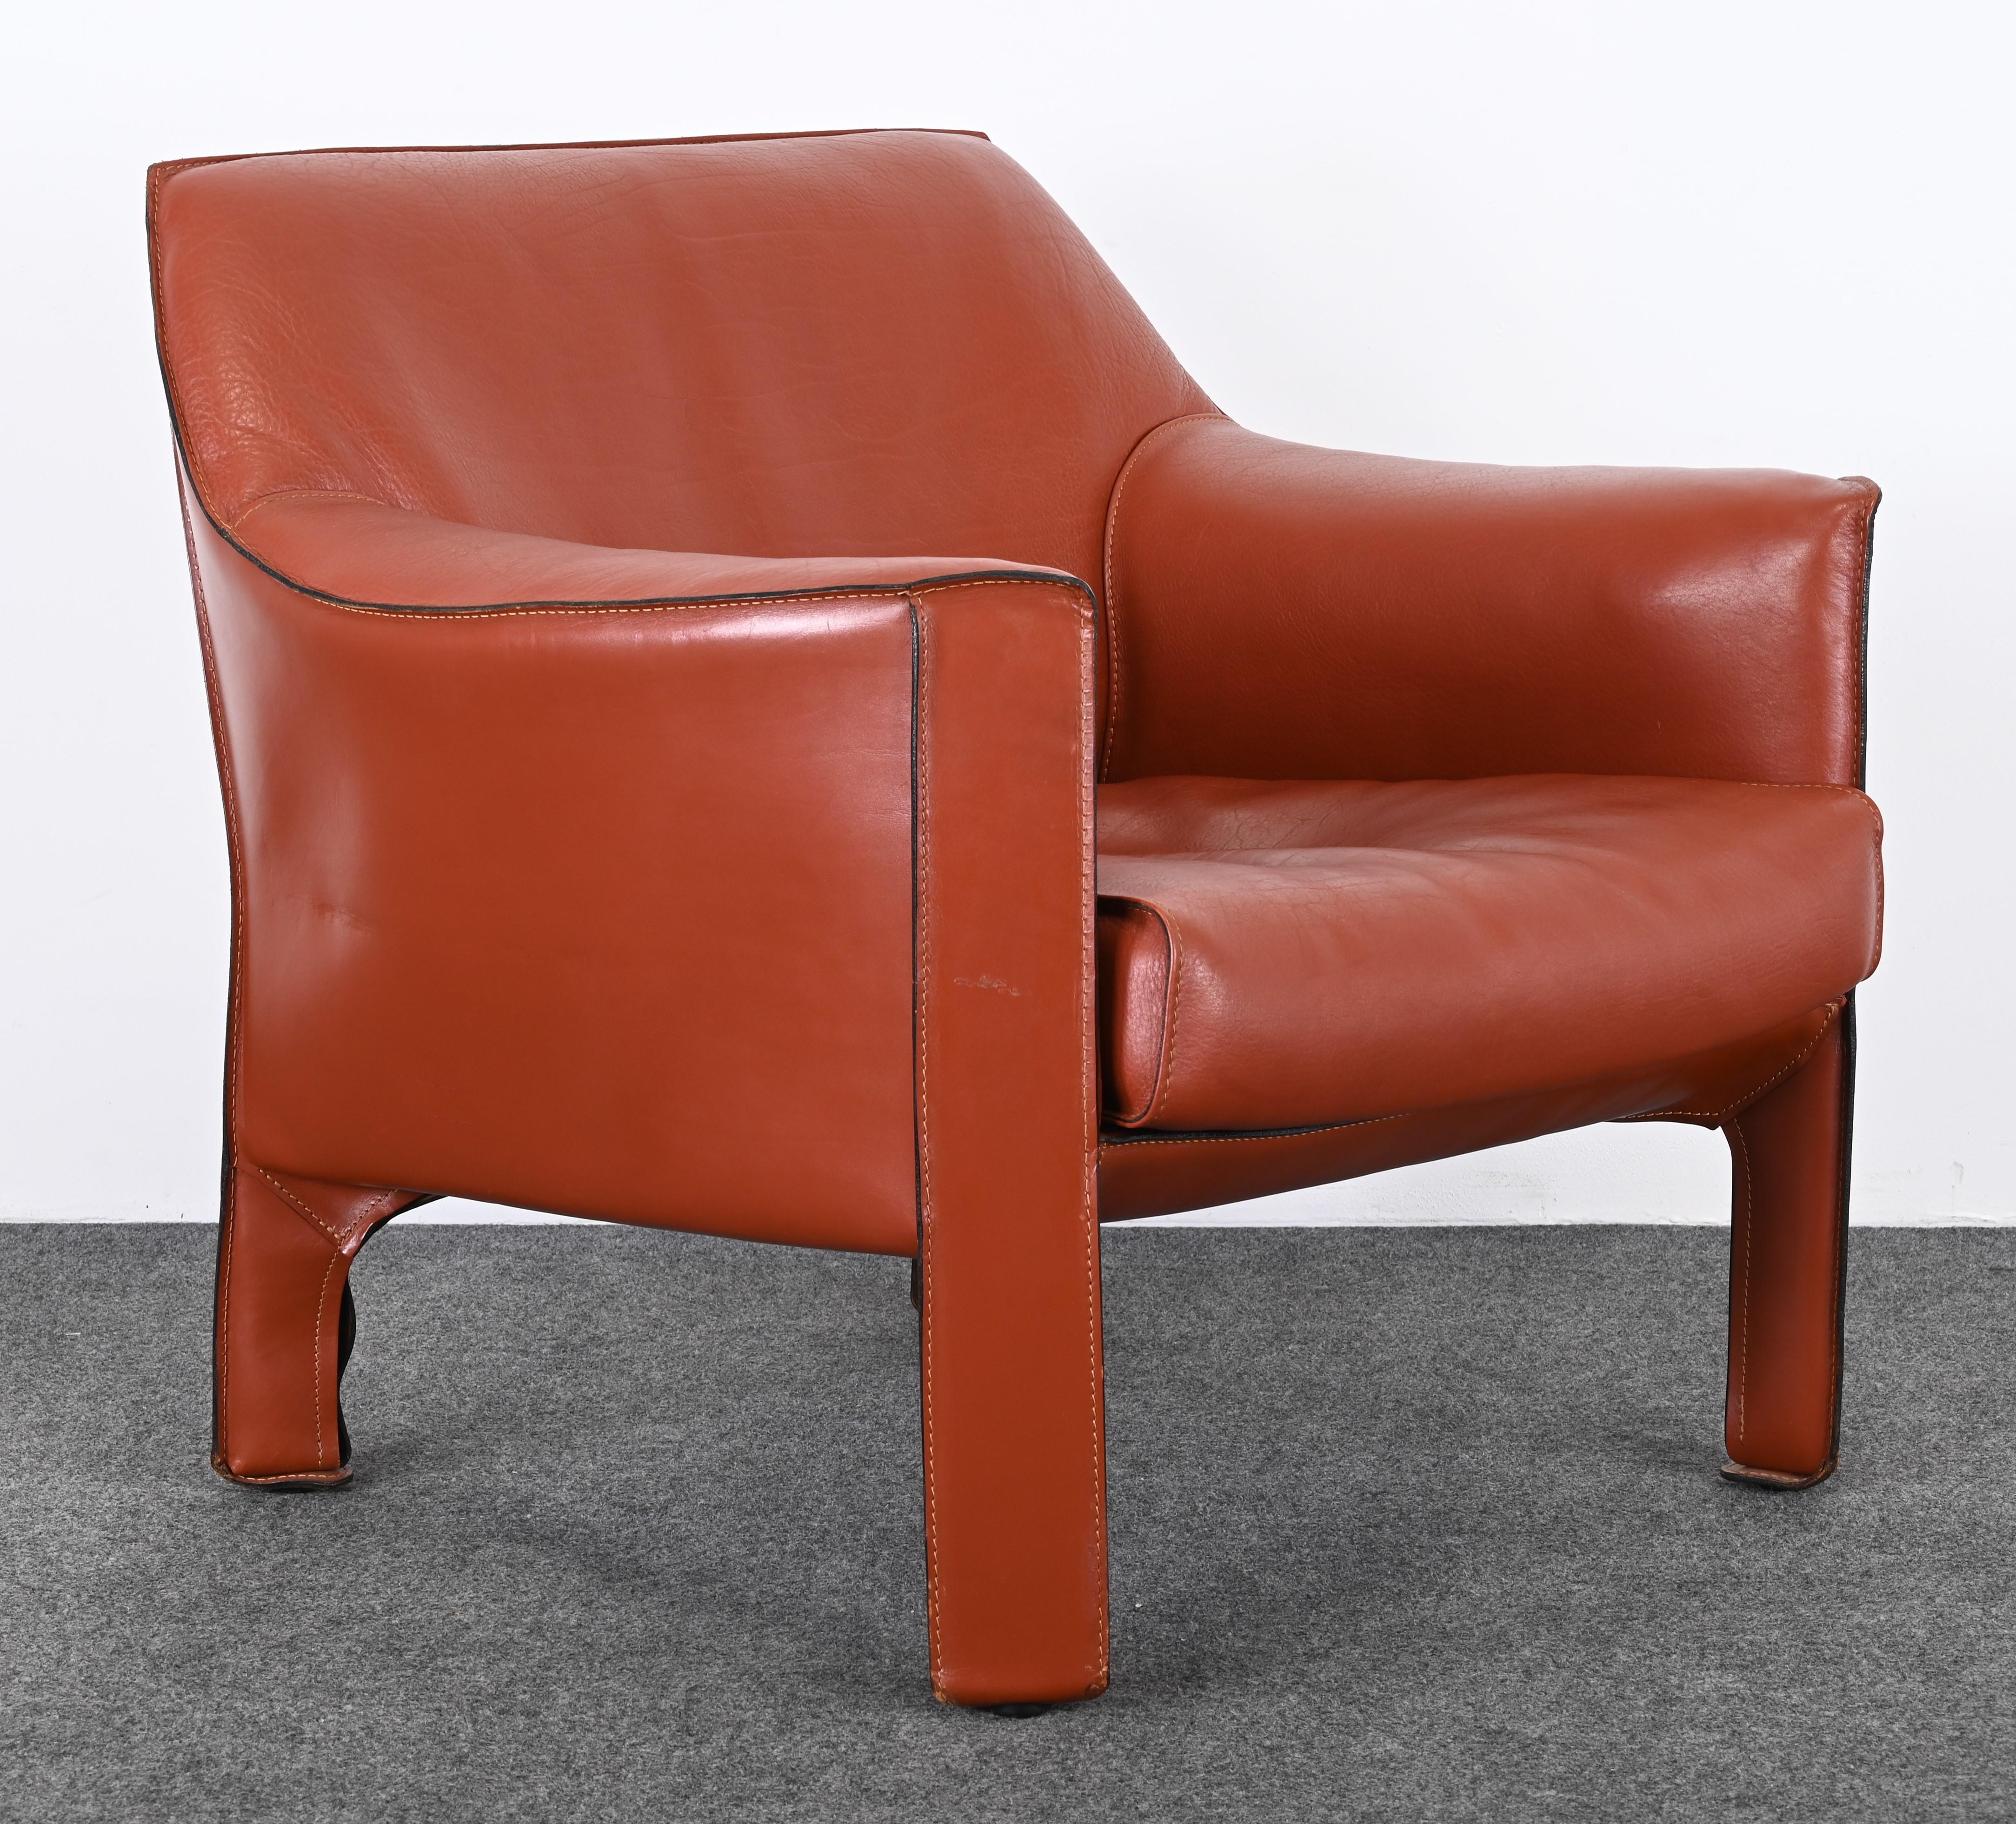 Mid-Century Modern Cassina Cab Chair 415 Designed by Mario Bellini, No Longer in Production